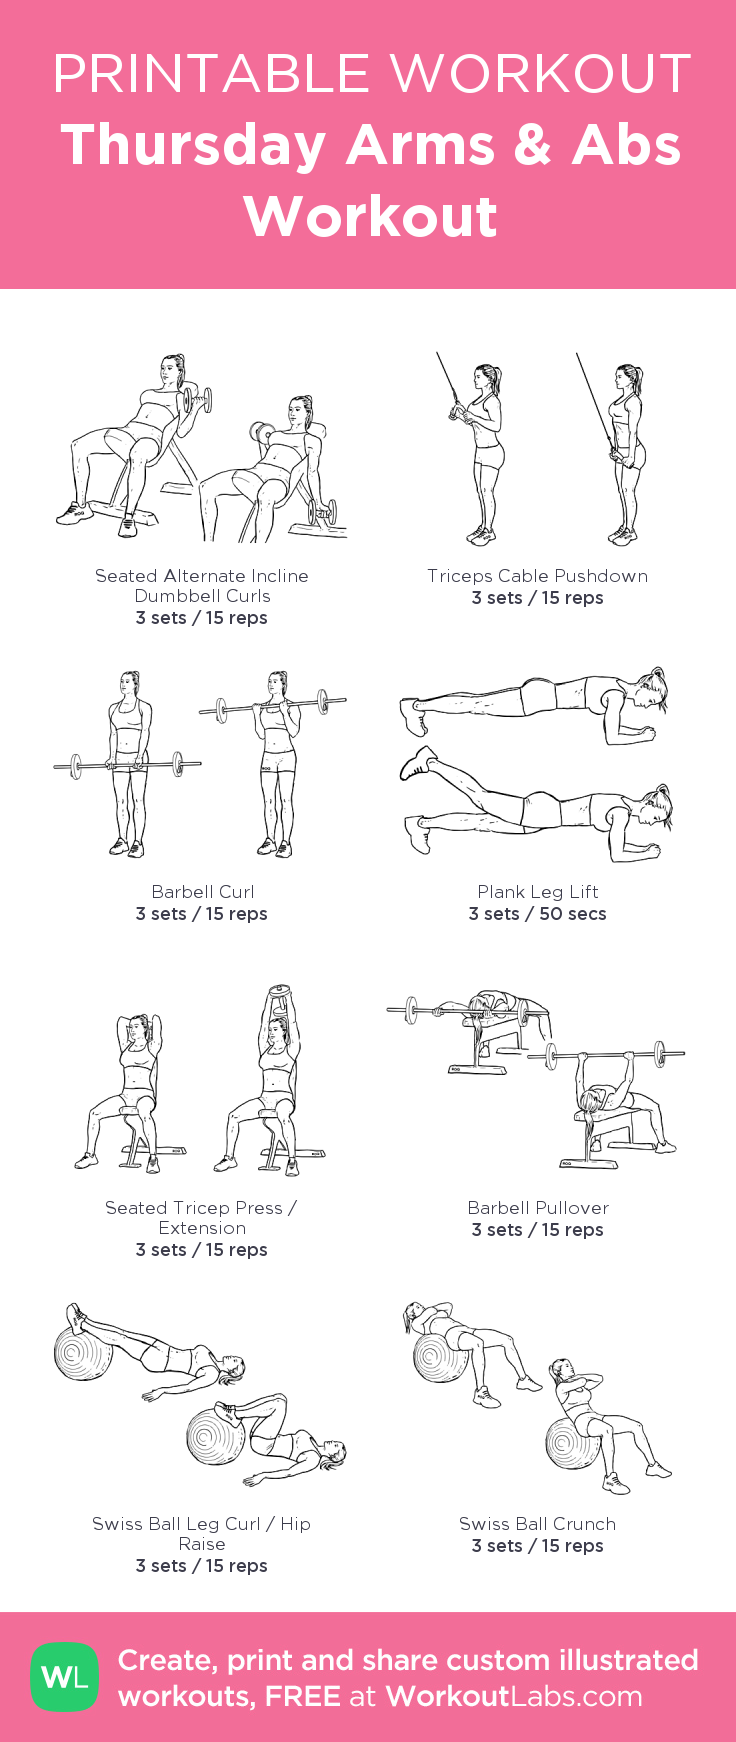 Thursday Arms & Abs Workout: my custom printable workout by 